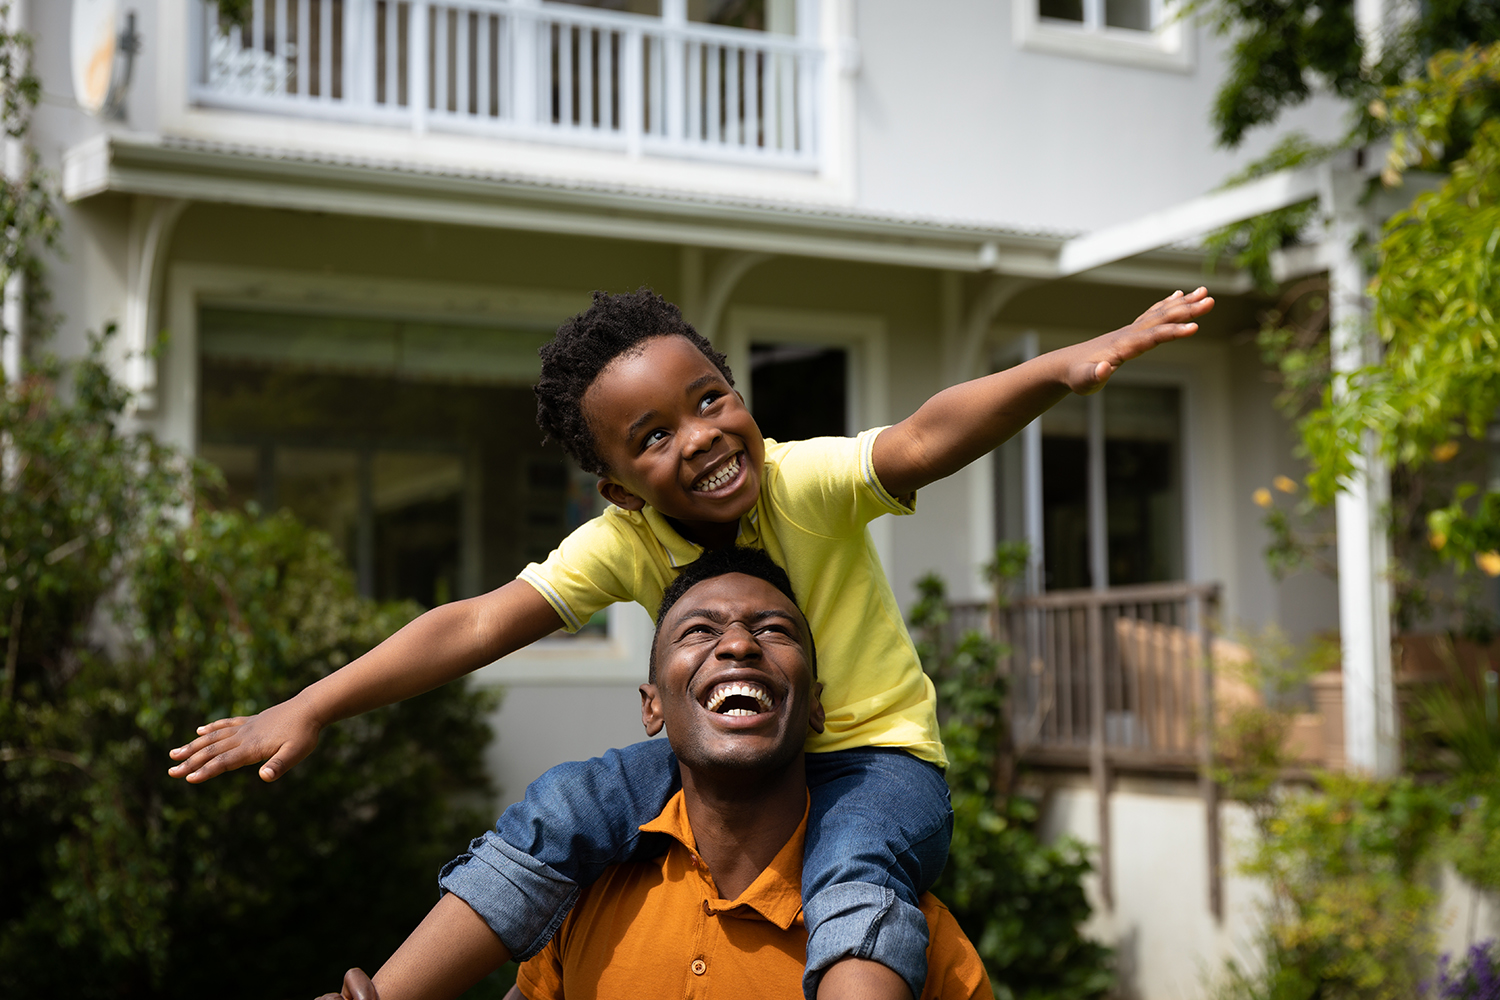 Front view of a smiling African American man in the garden carrying his son piggyback, the boy stretching his arms out